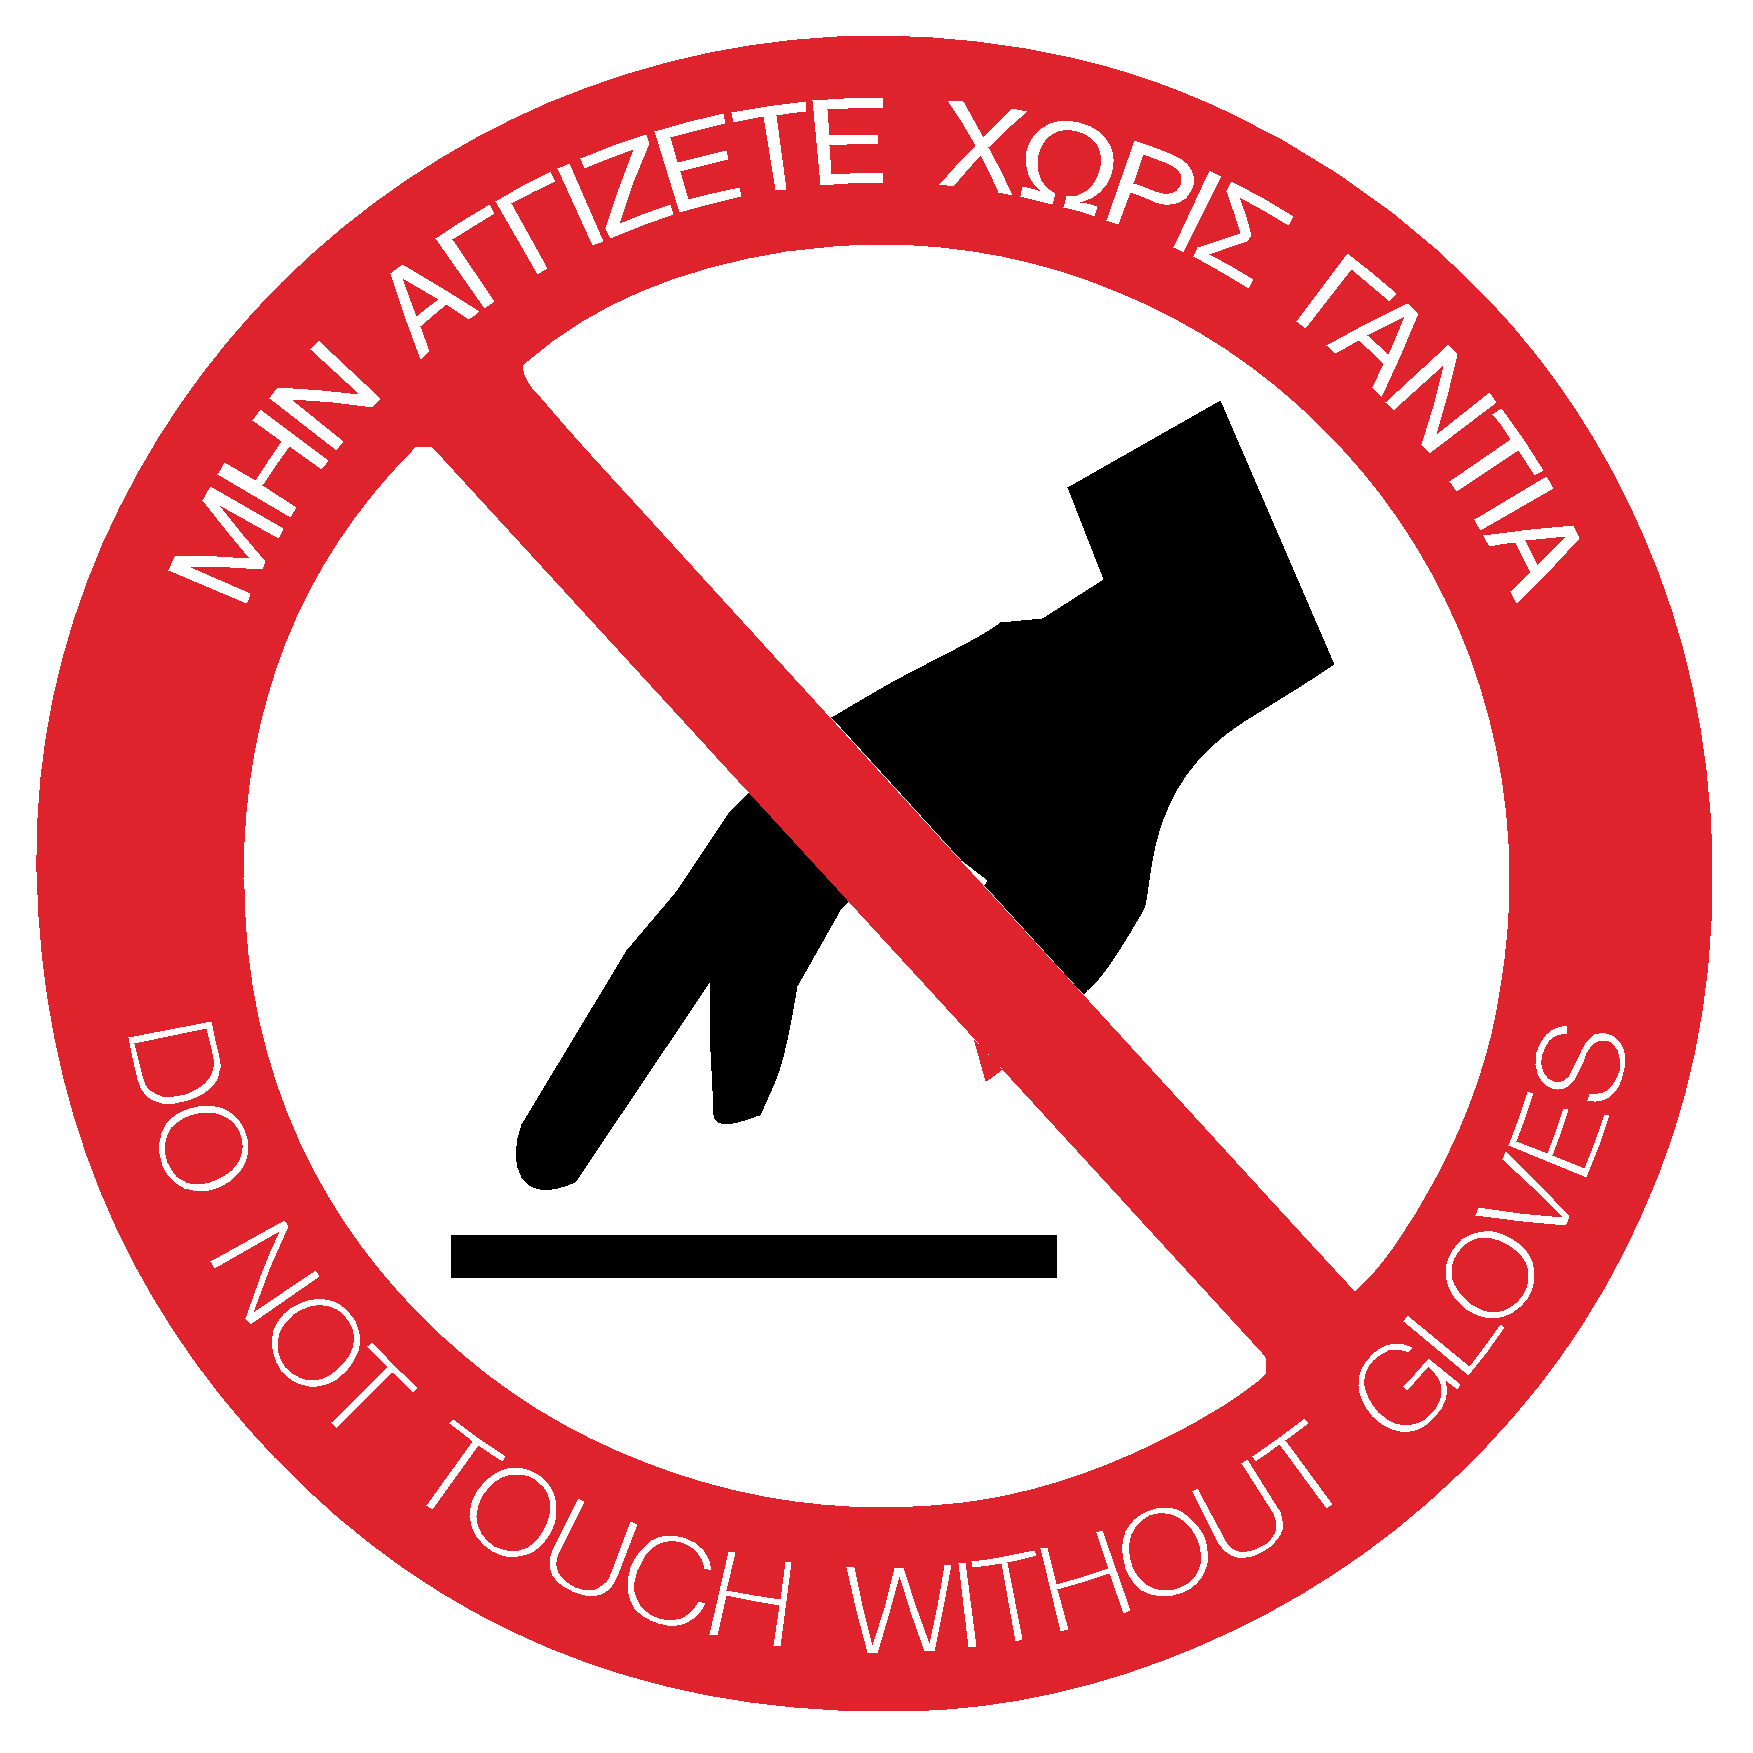 DO NOT TOUCH (SET OF 2PC) SIGN